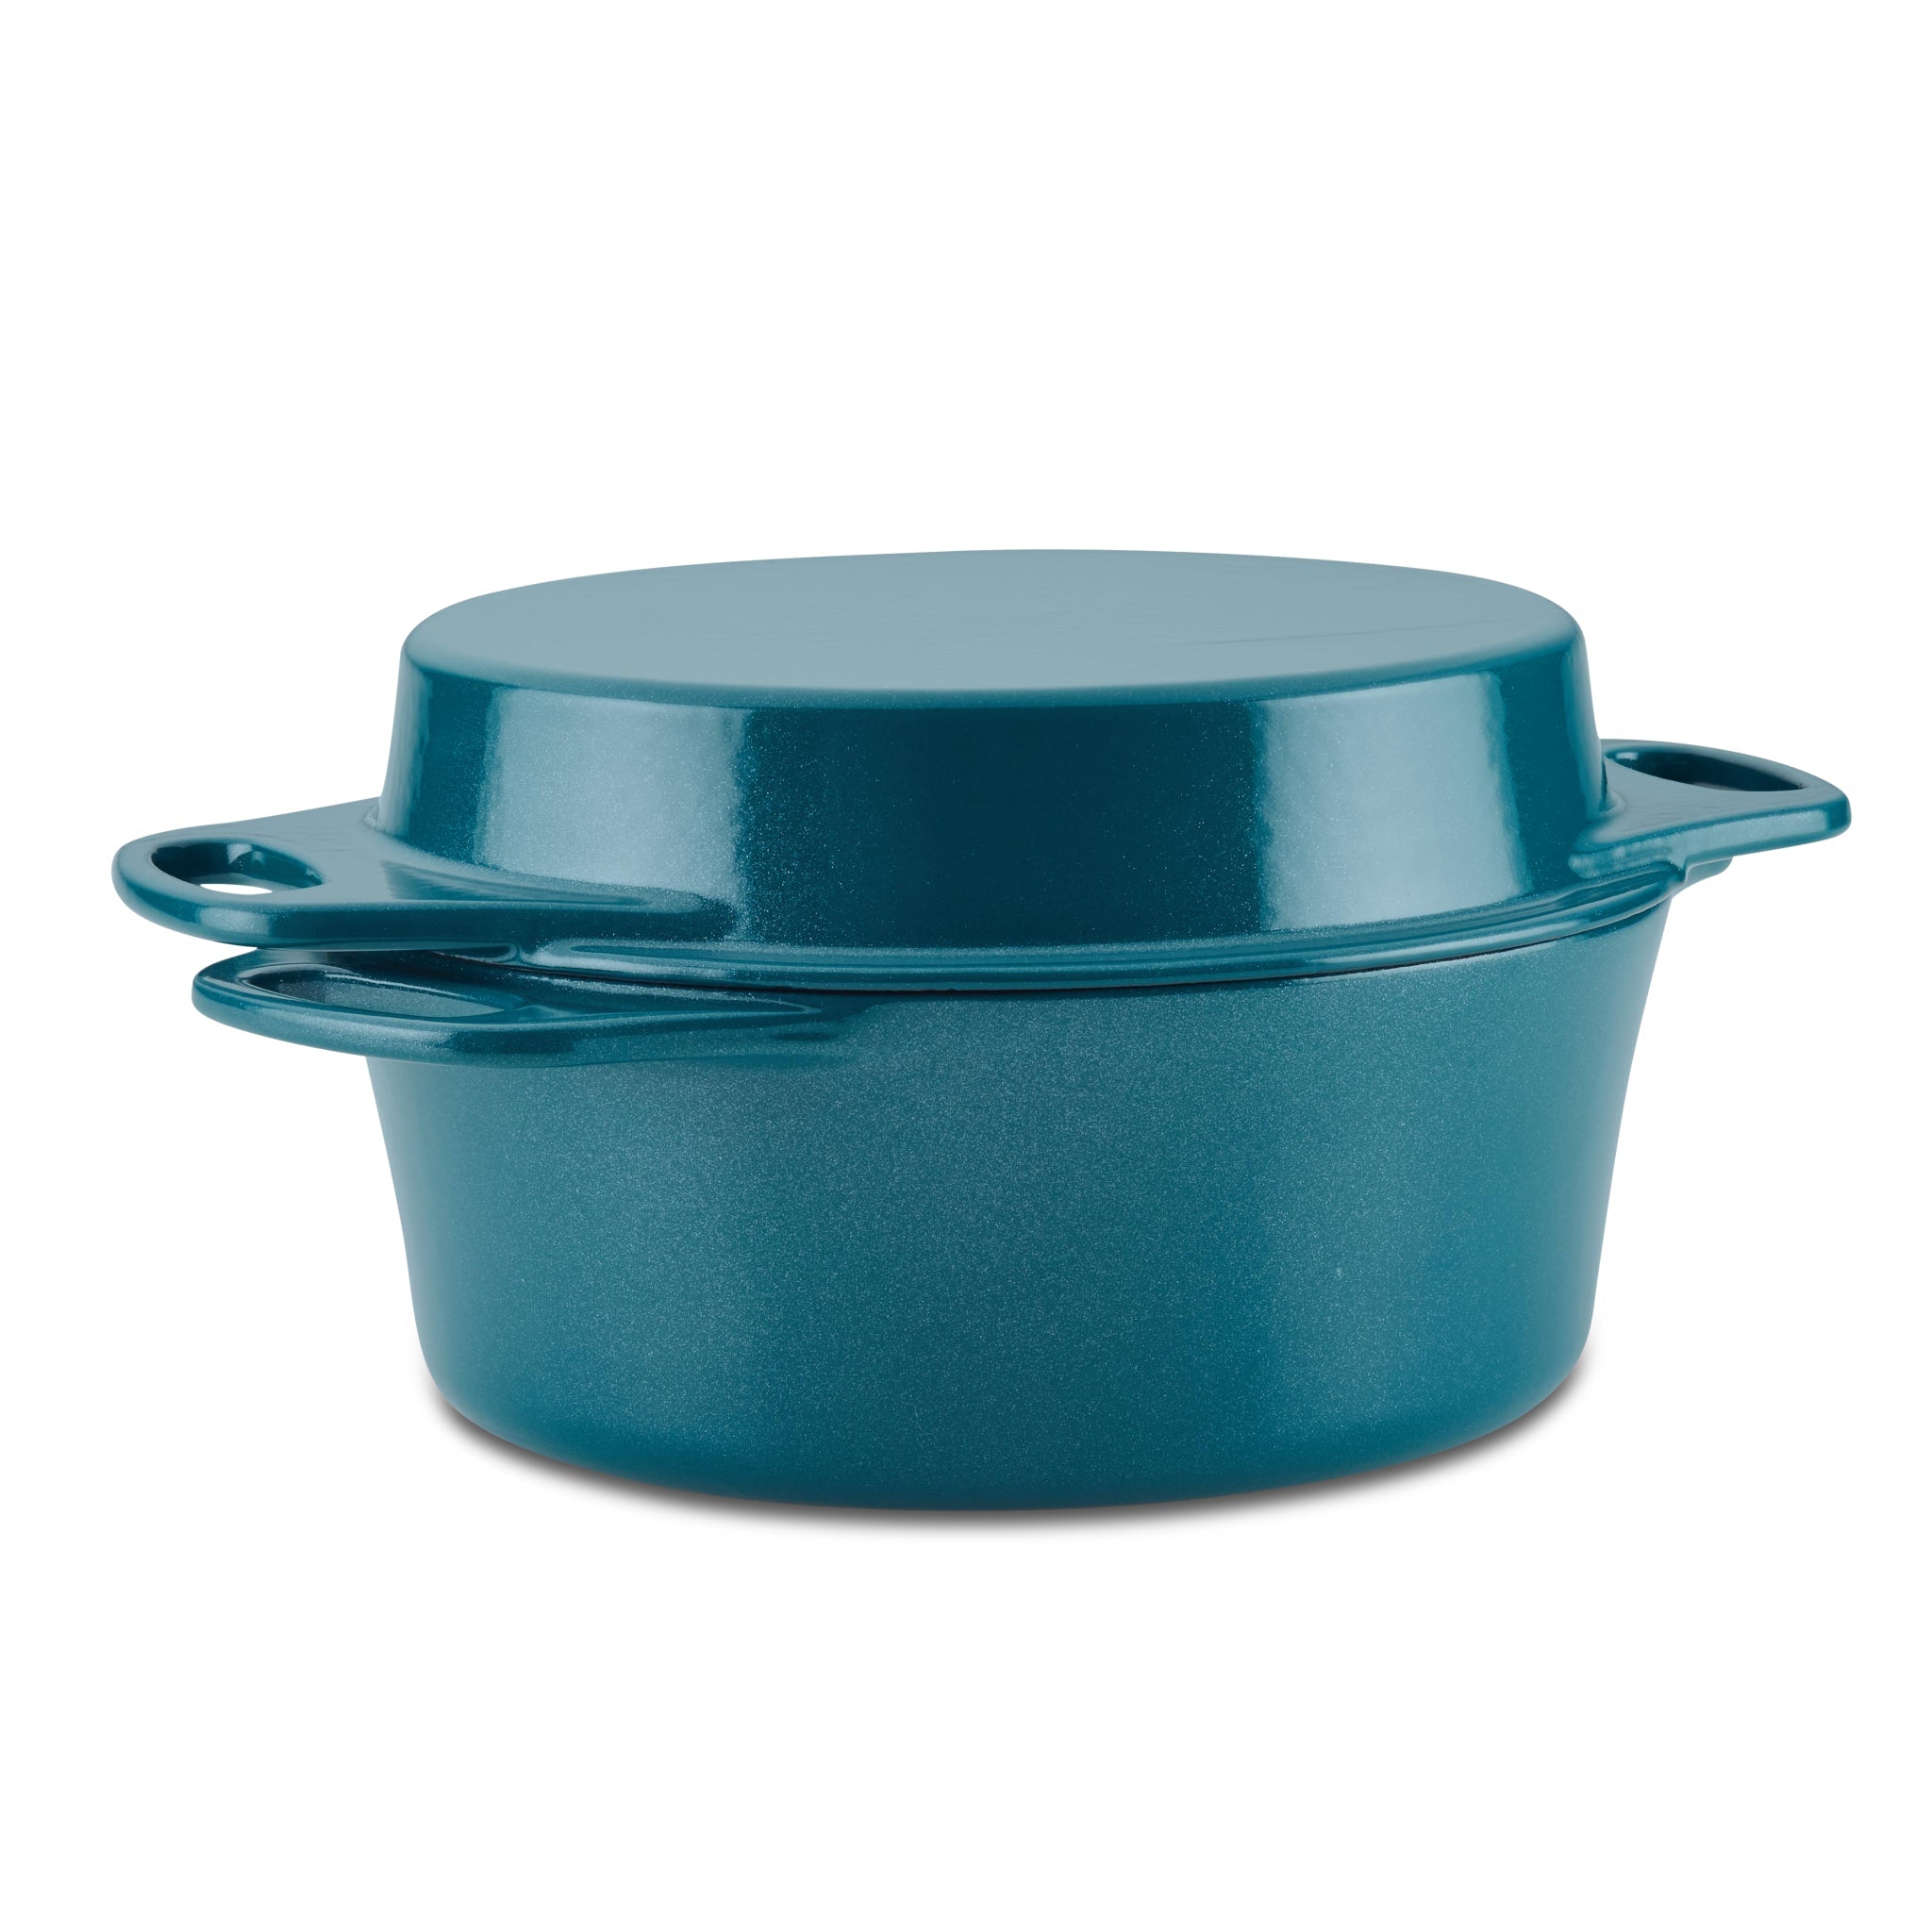 Rachael Ray Enameled Cast Iron Dutch Oven/Casserole Pot with Lid, 5 Quart,  Teal